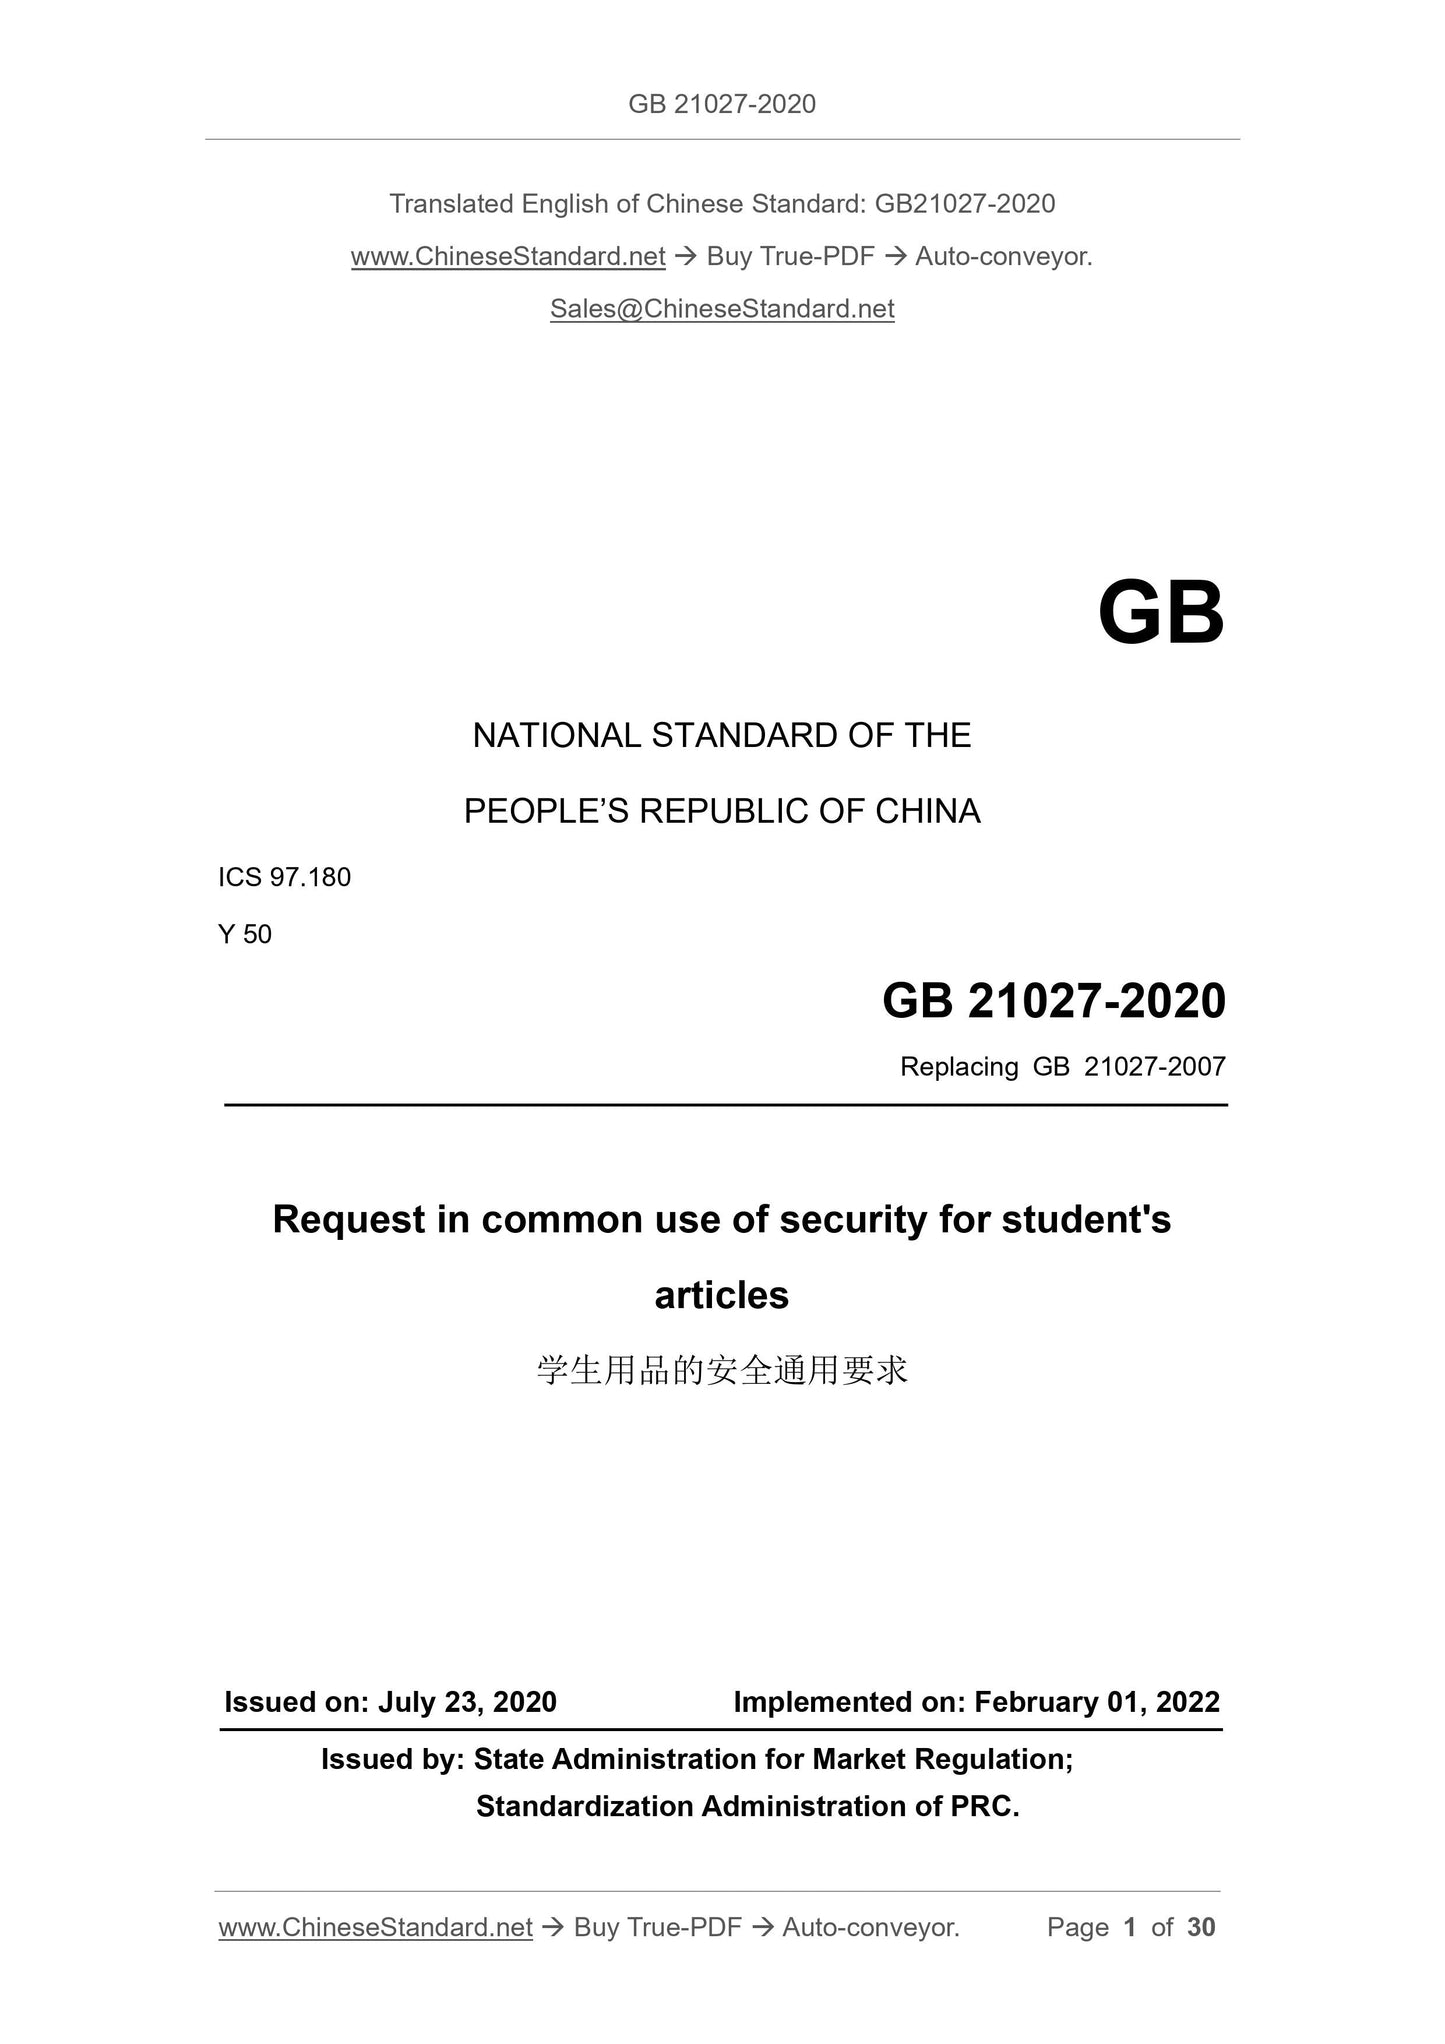 GB 21027-2020 Page 1